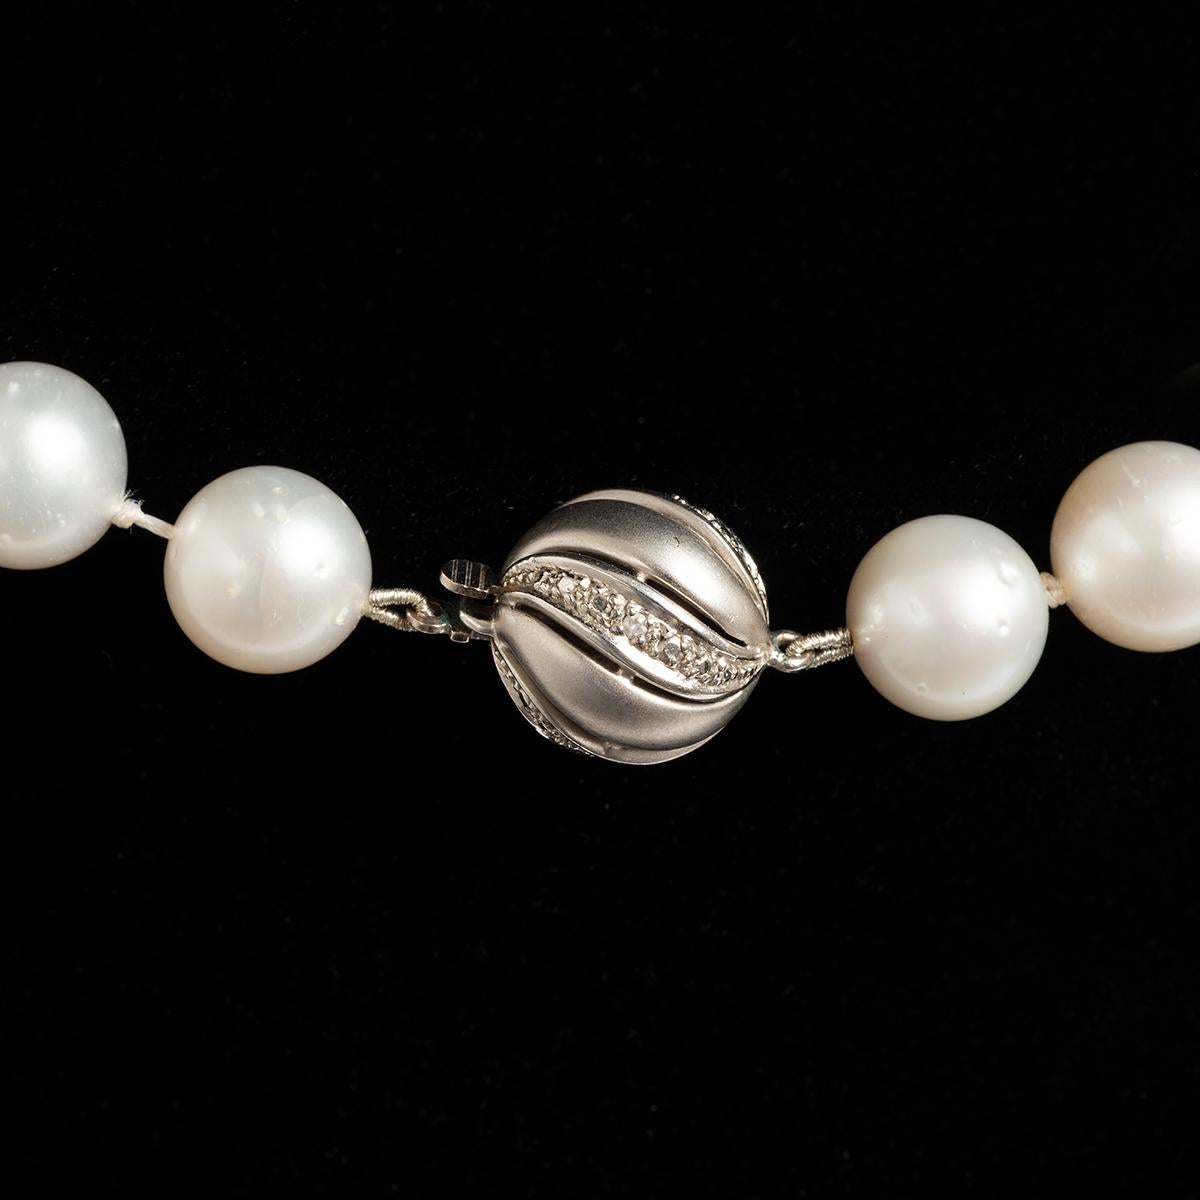 Our contemporary, circa 2000, exceptional quality pearl necklace consists of the finest graduated white natural South Sea pearls. Each significant pearl is individually knotted between for security to the chain, and is fastened by a decorative ball